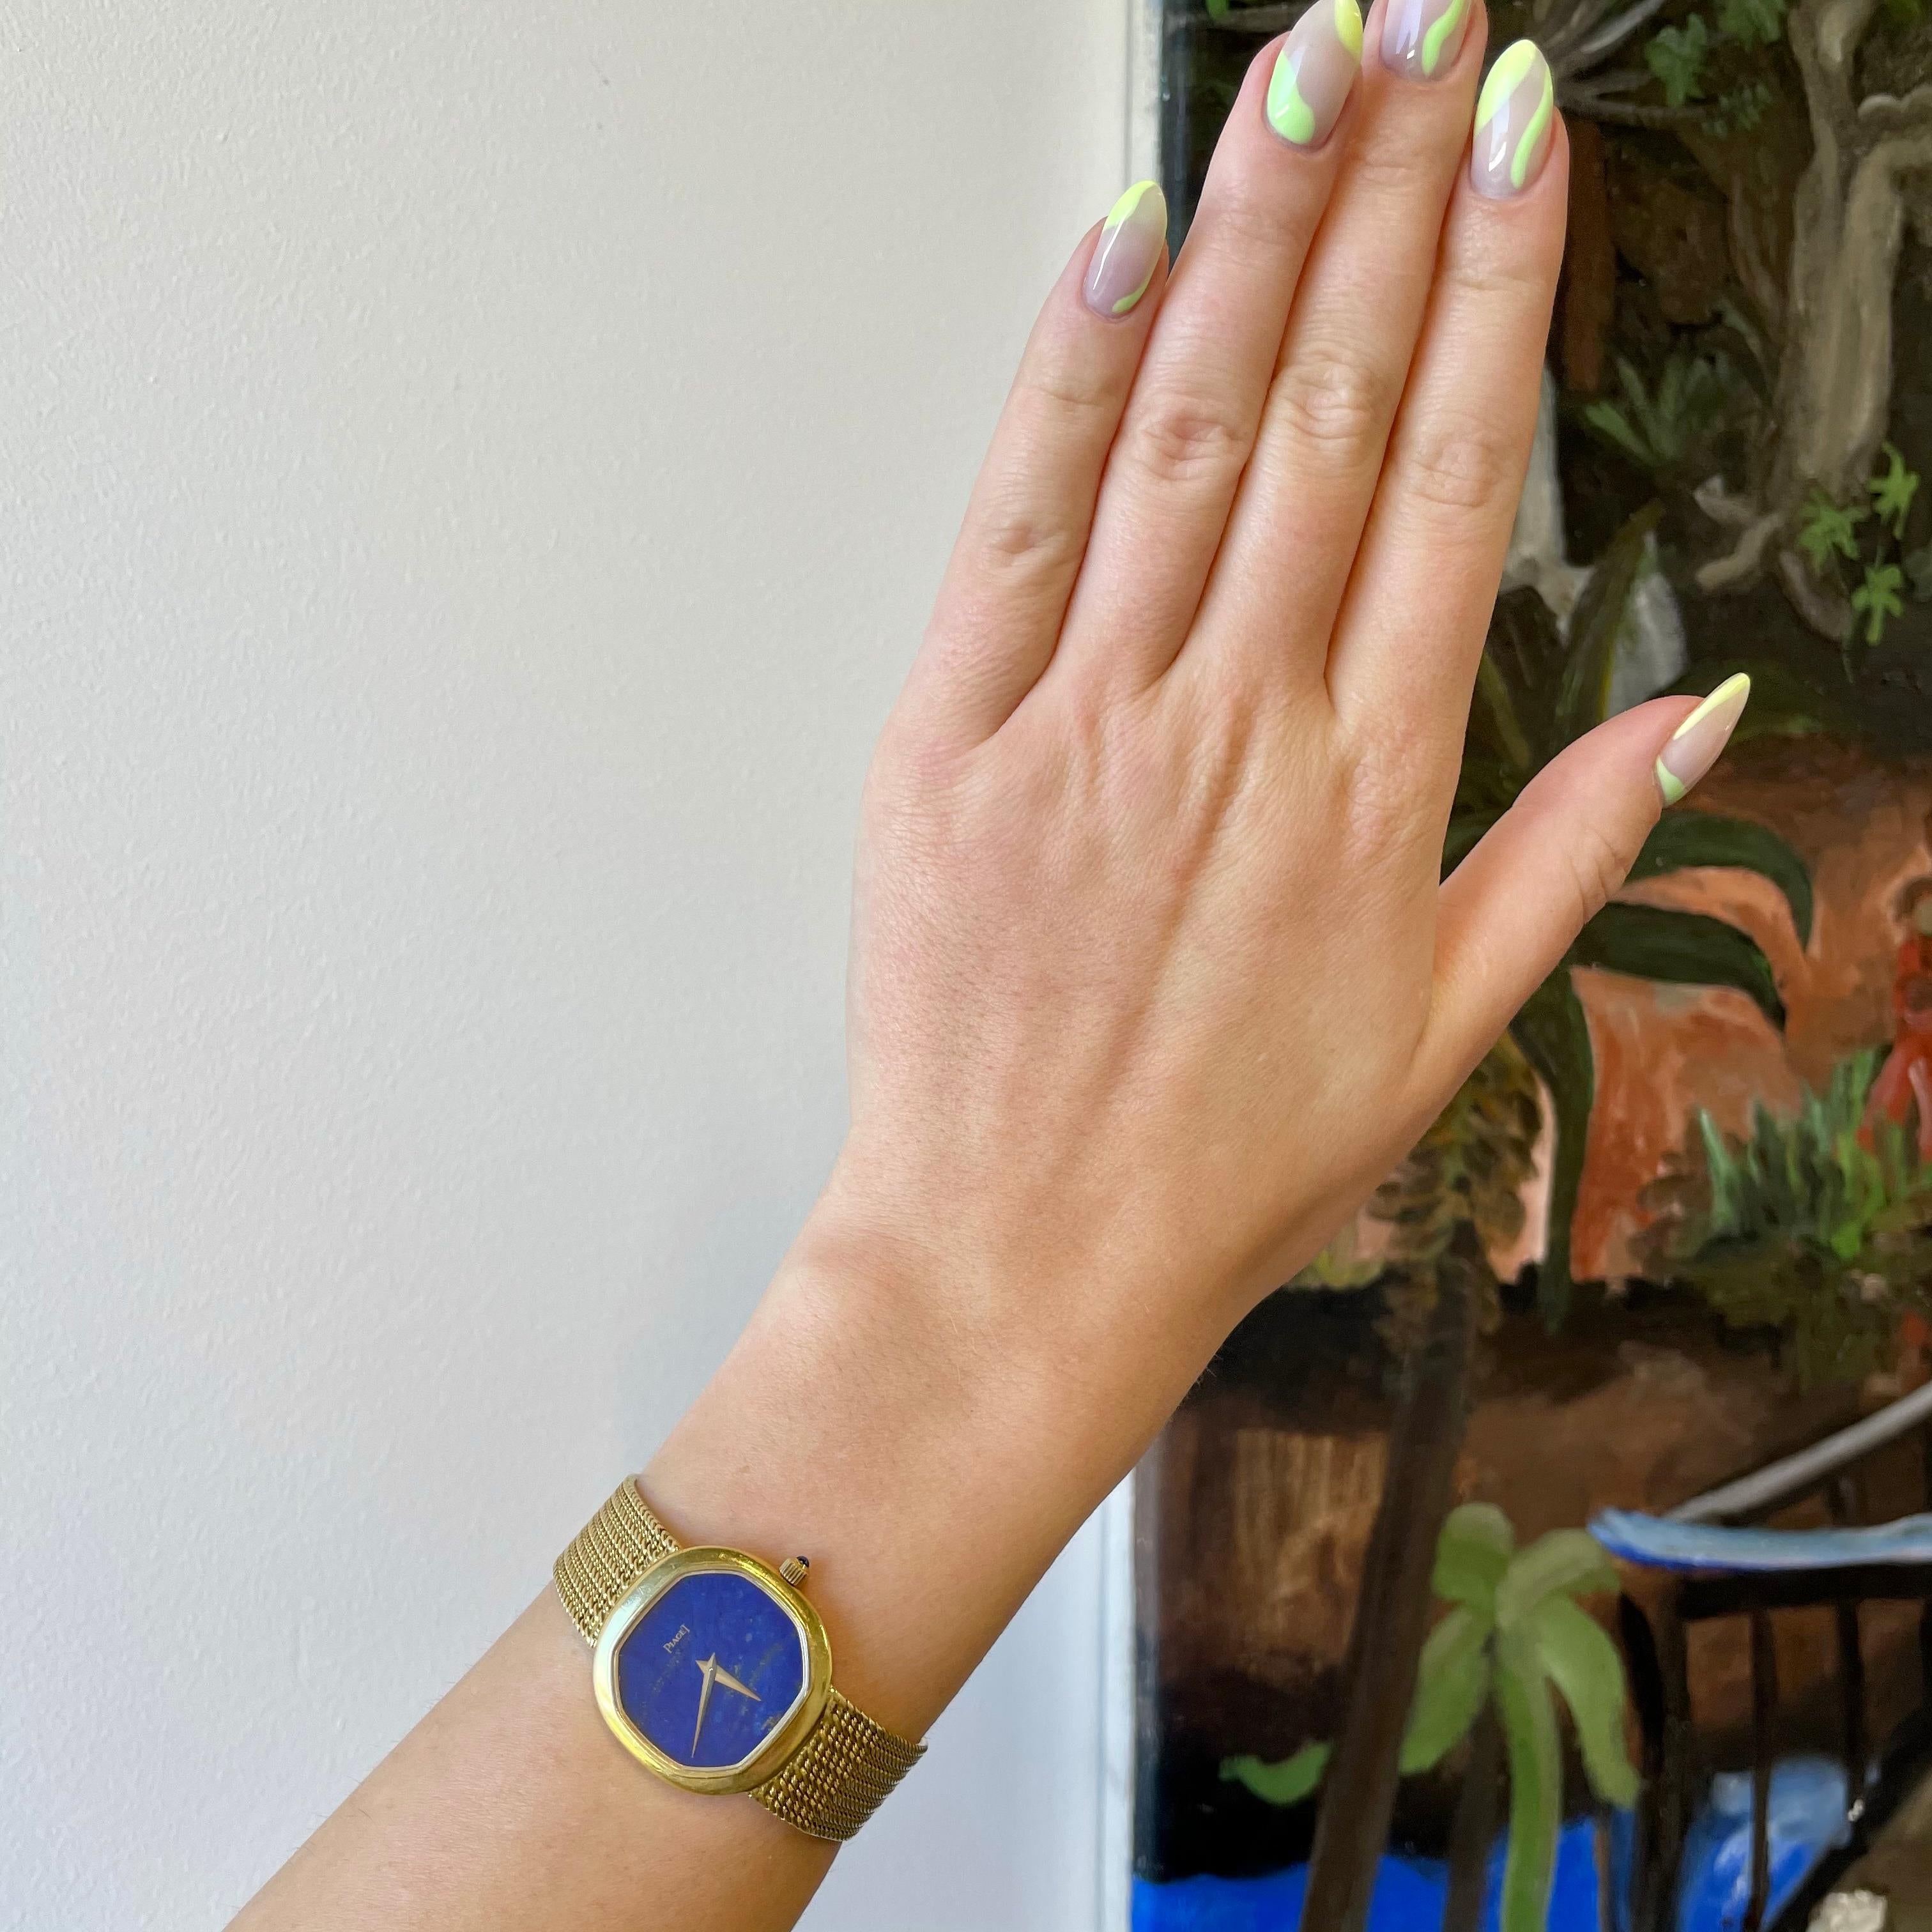 You'll enjoy telling time the old fashioned way. Seeing the sky blue Piaget watch on your wrist will not only brighten your day but you'll also own a timepiece of sophisticated luxury. 

Vintage Piaget Lapis Lazuli 18k Gold Watch. Featuring a